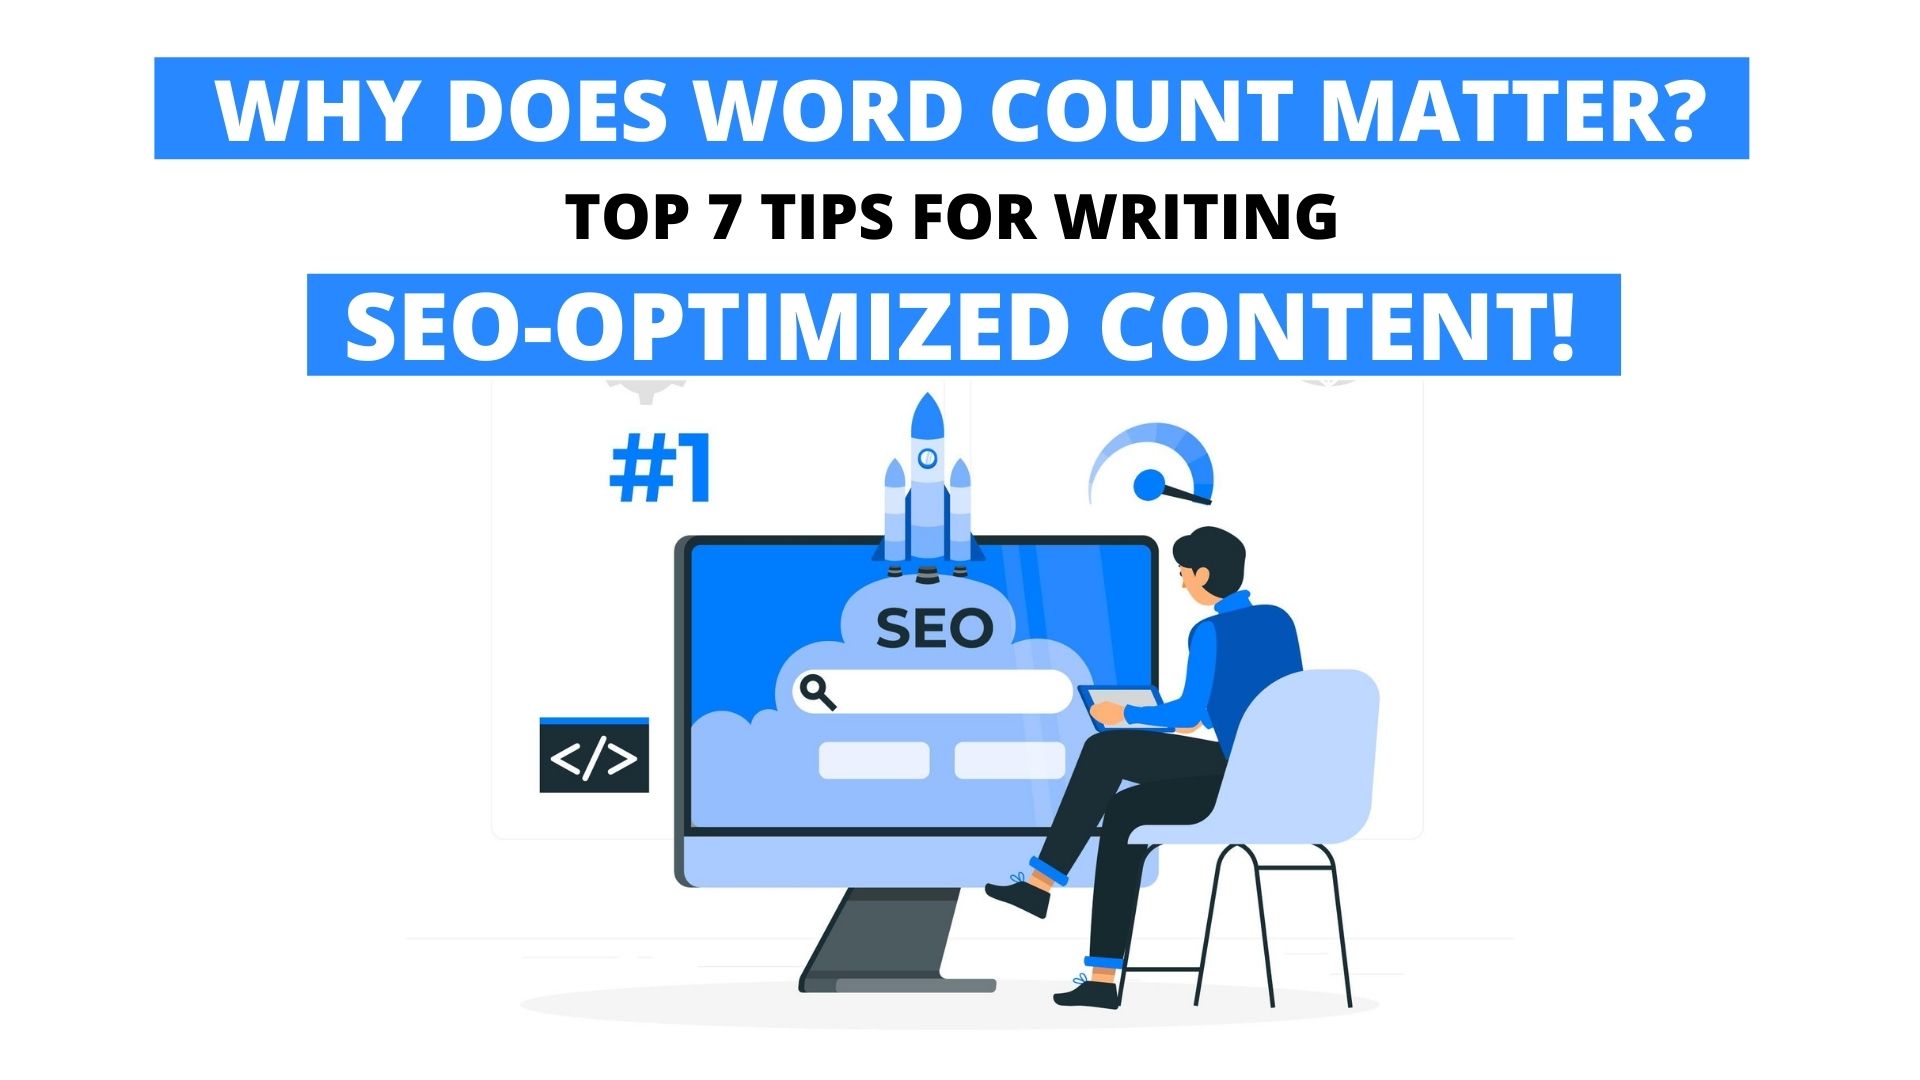 Why-Does-Word-Count-Matter-Top-7-Tips-For-Writing-SEO-Optimized-Content